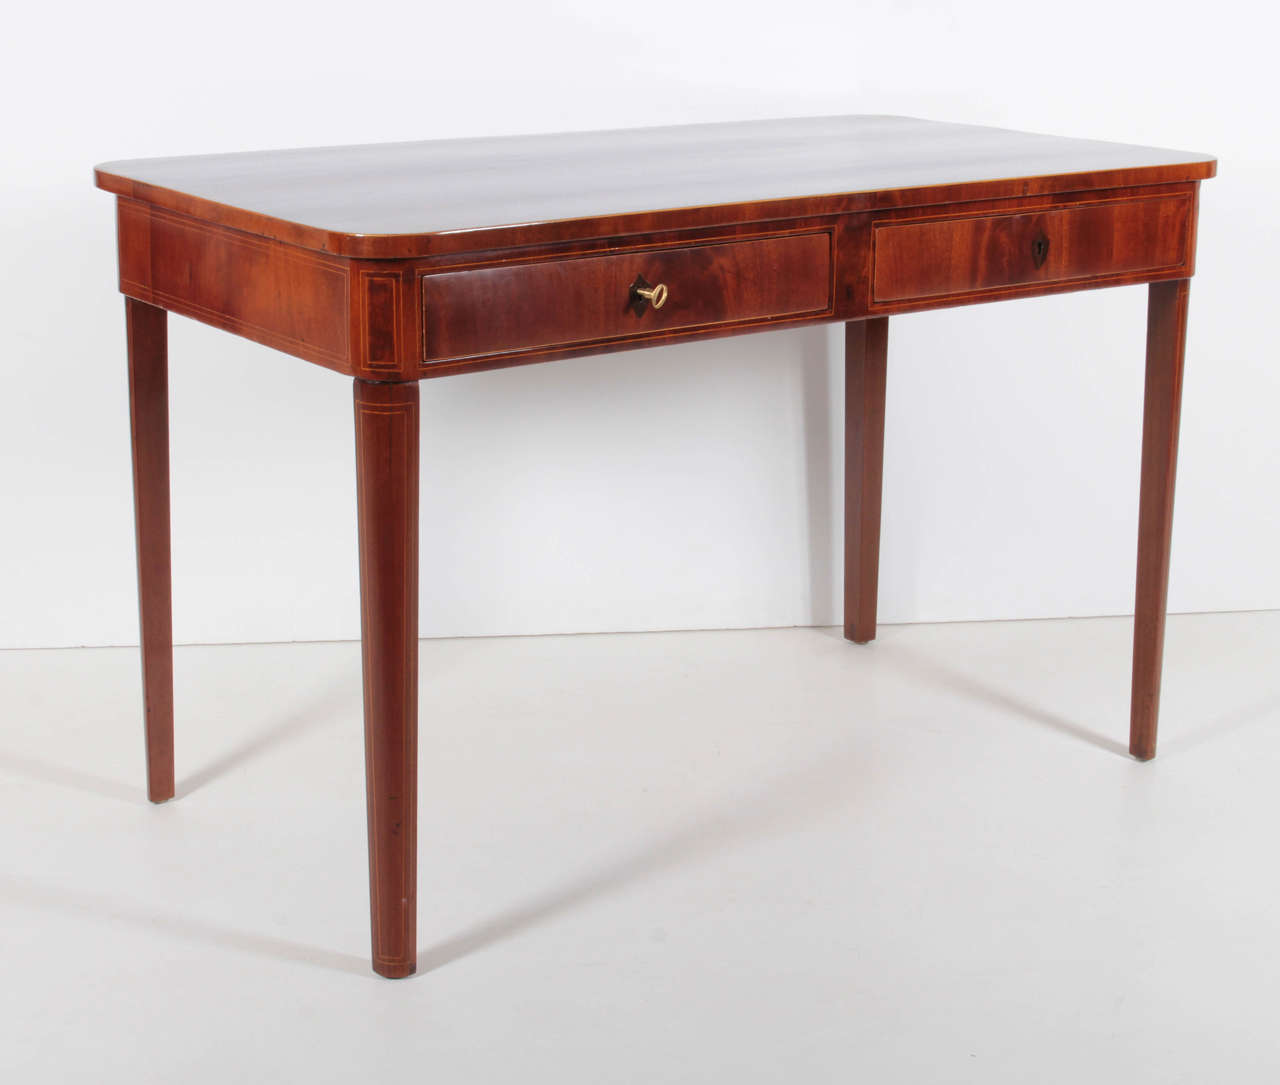 A Danish Late Empire mahogany line inlaid bureau plat, Circa 1830, the rectangular top with rounded corners above two frieze drawers raised on quarter rounded and tapered legs.